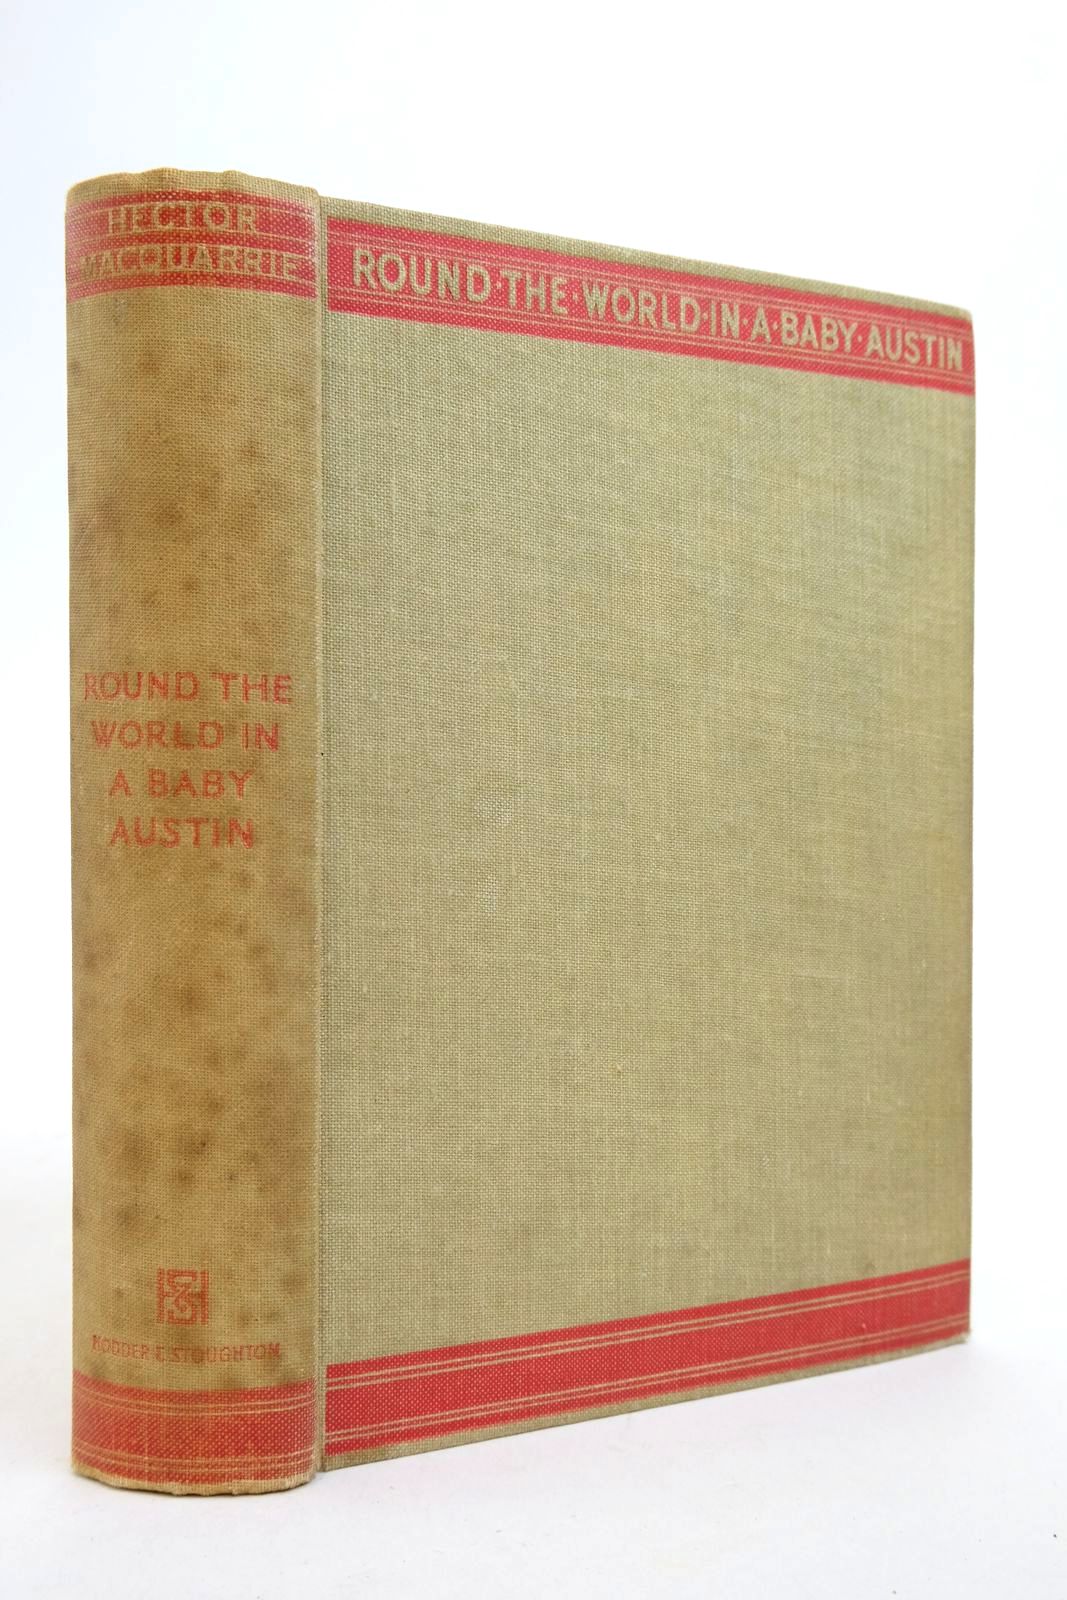 Photo of ROUND THE WORLD IN A BABY AUSTIN written by MacQuarrie, Hector published by Hodder & Stoughton (STOCK CODE: 2140364)  for sale by Stella & Rose's Books